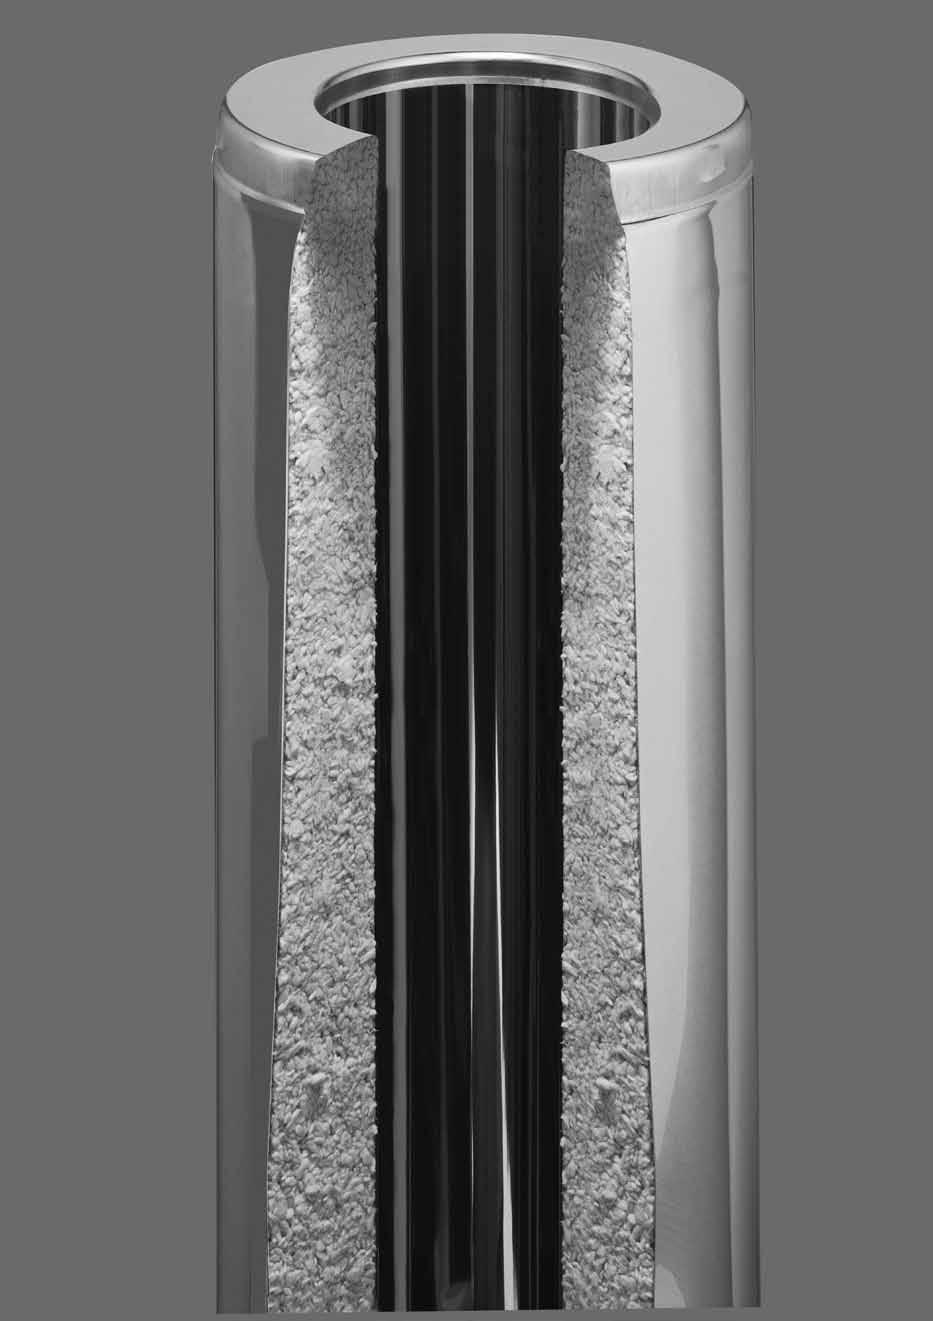 engineered for perfection Oliver MacLeod chimneys are made of stainless steel for outstanding resistance to corrosion and feature exclusive